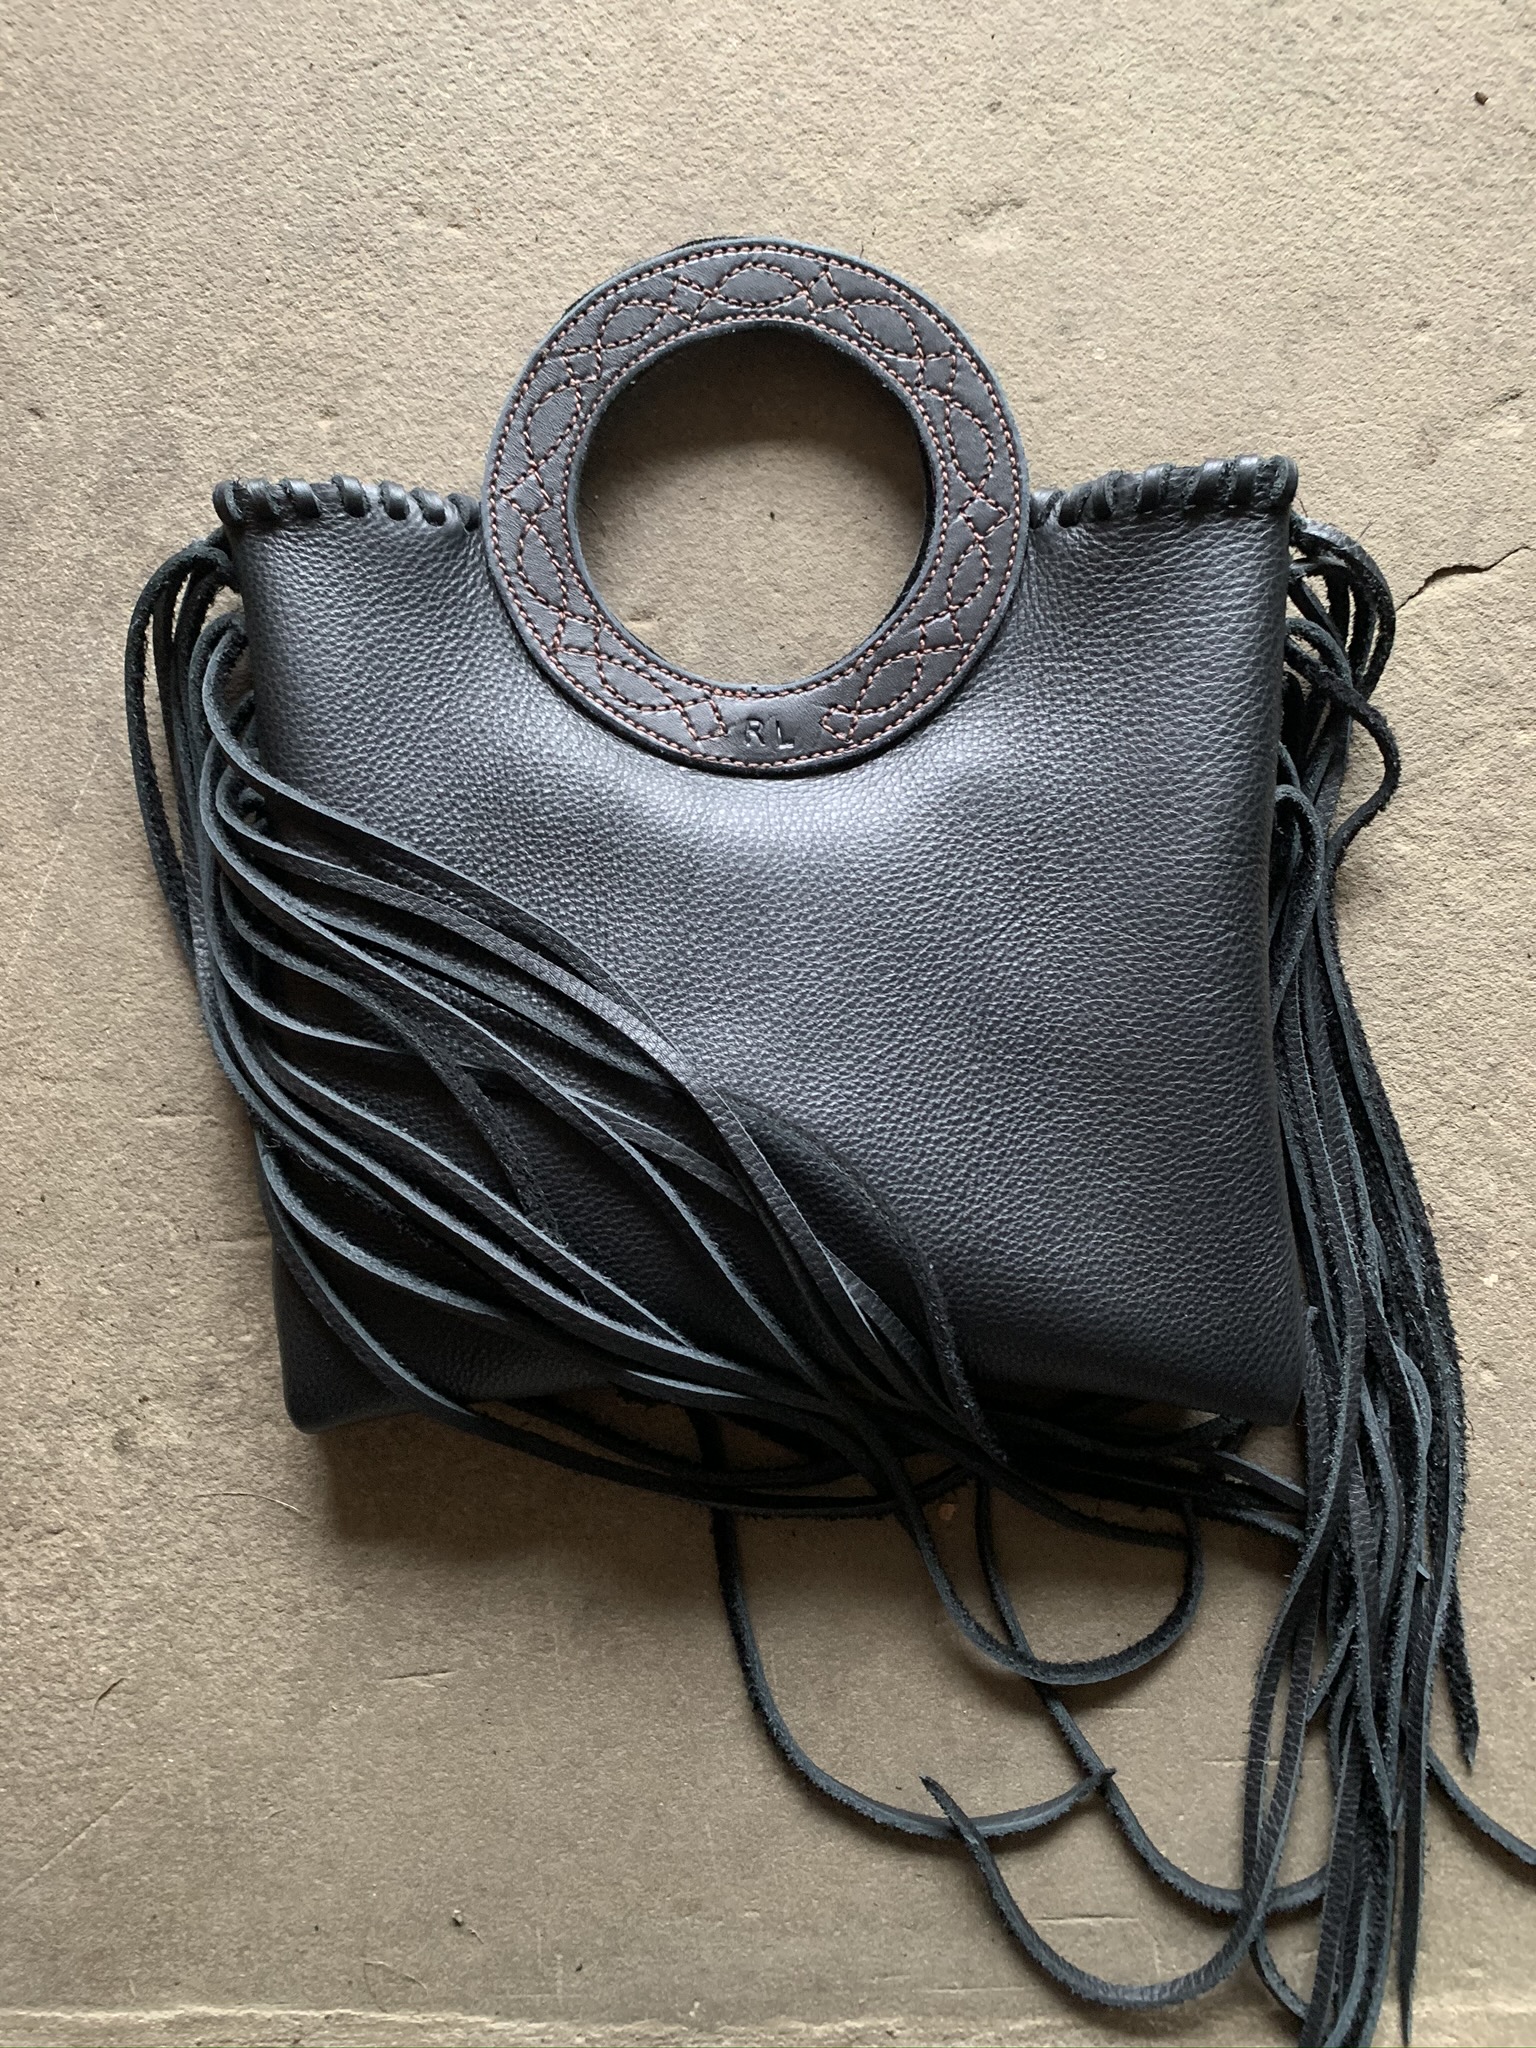 Handbags by Rivet Leatherworks of Pennsylvania, which are made the old-fashioned way – by hand, one at a time – can be seen and shopped at the WDC Exhibit + Sale.